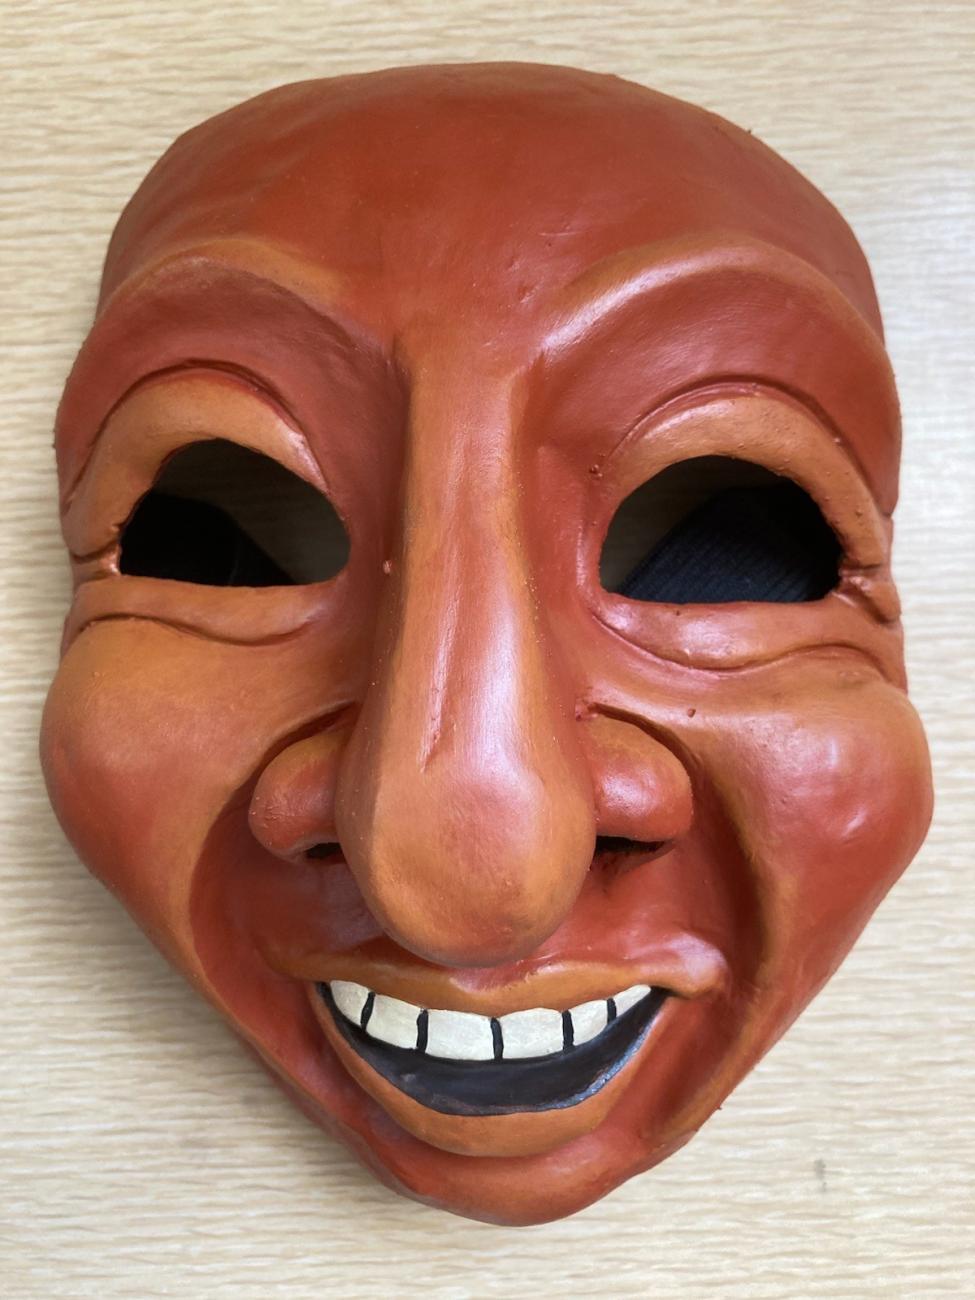 Earth-colored cartoonish laughing mask, with a big nose and empty eye sockets